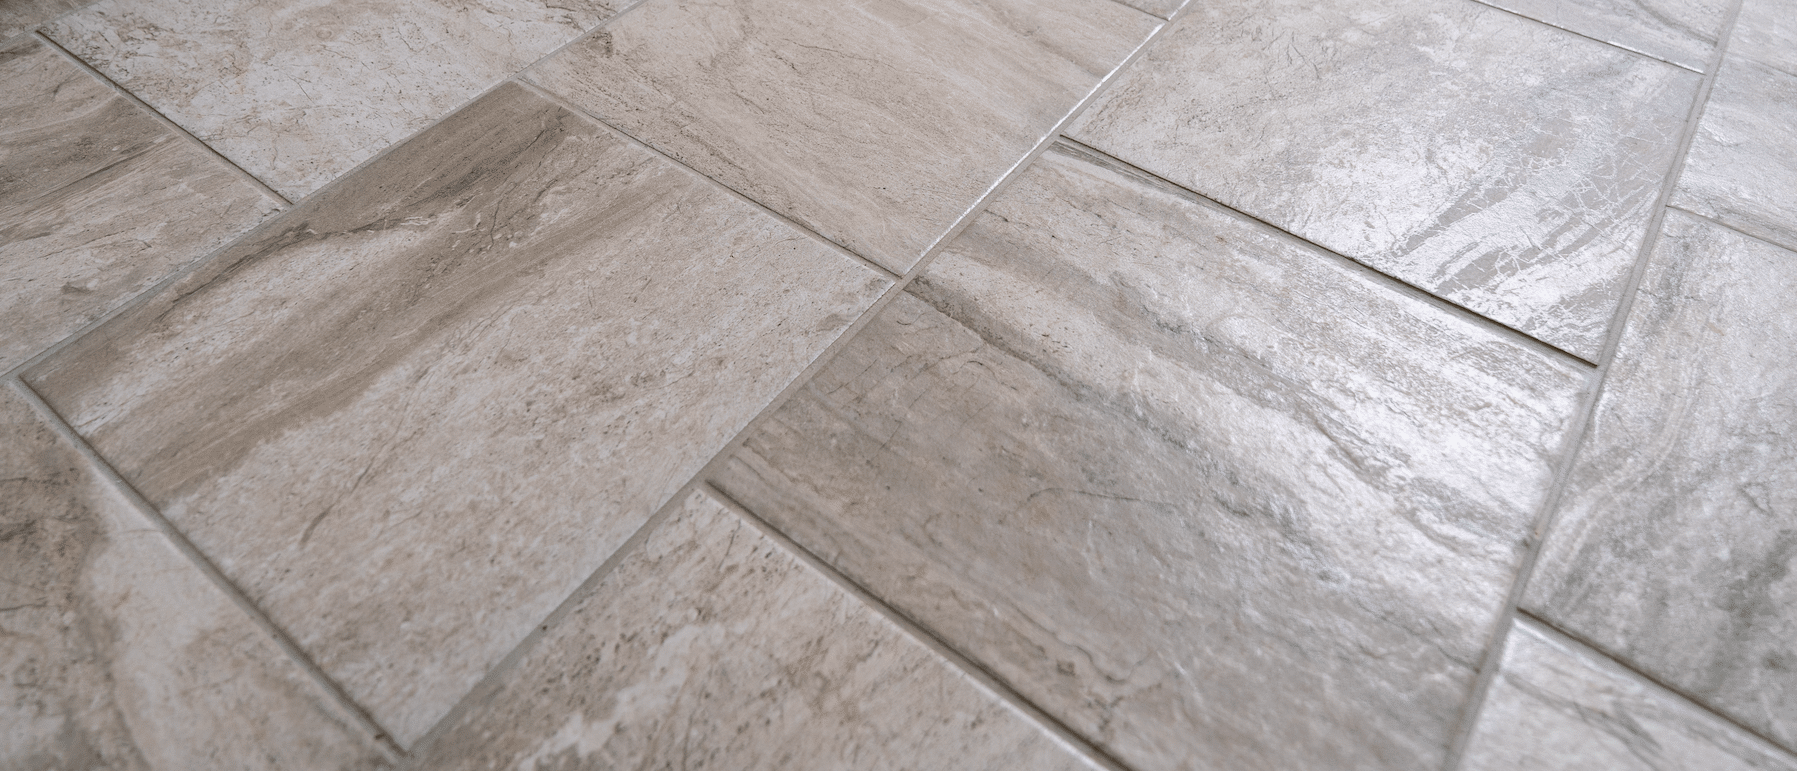 The Pros and Cons of Tile Flooring